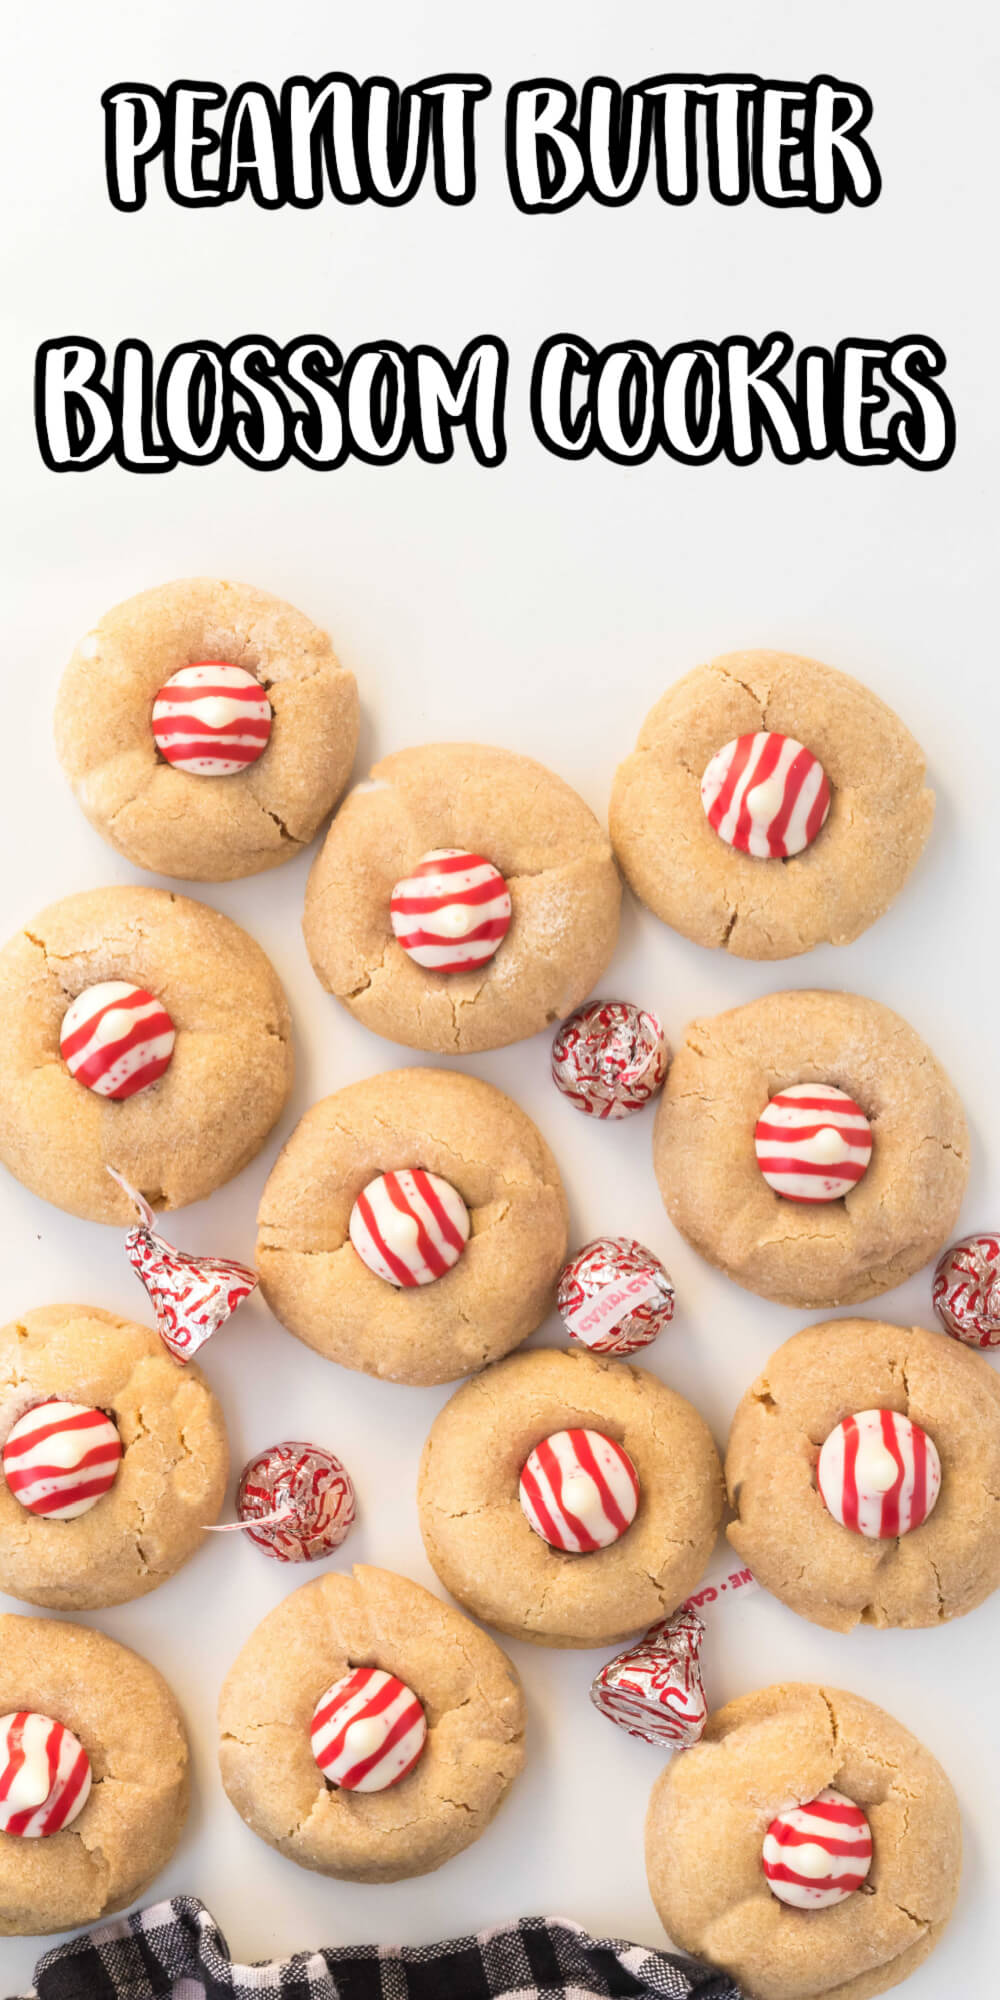 Soft and Chewy the Peanut Butter Blossom Cookies recipe is perfect for any holiday or bake sale. Switch out the Hershey's kiss to suit the occasion. These are the best peanut butter cookies you'll ever eat. The Blossoms are one of the most popular cookies during the Christmas season.